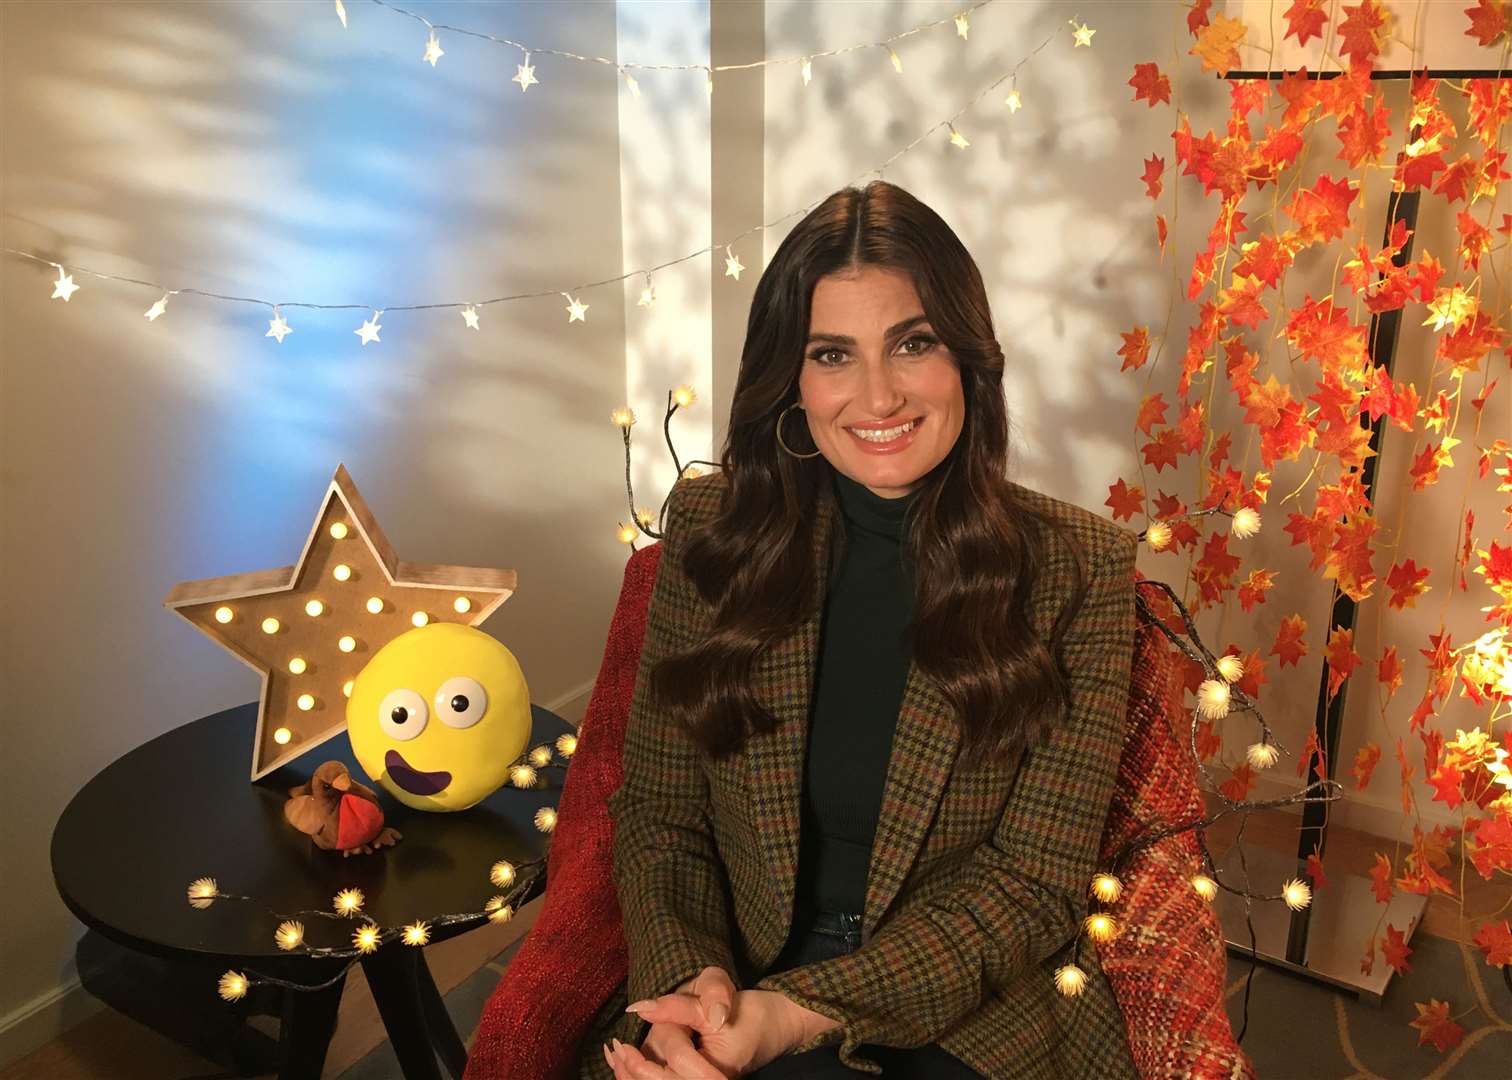 Idina Menzel is going to read a Bedtime Story on Sunday, November 24